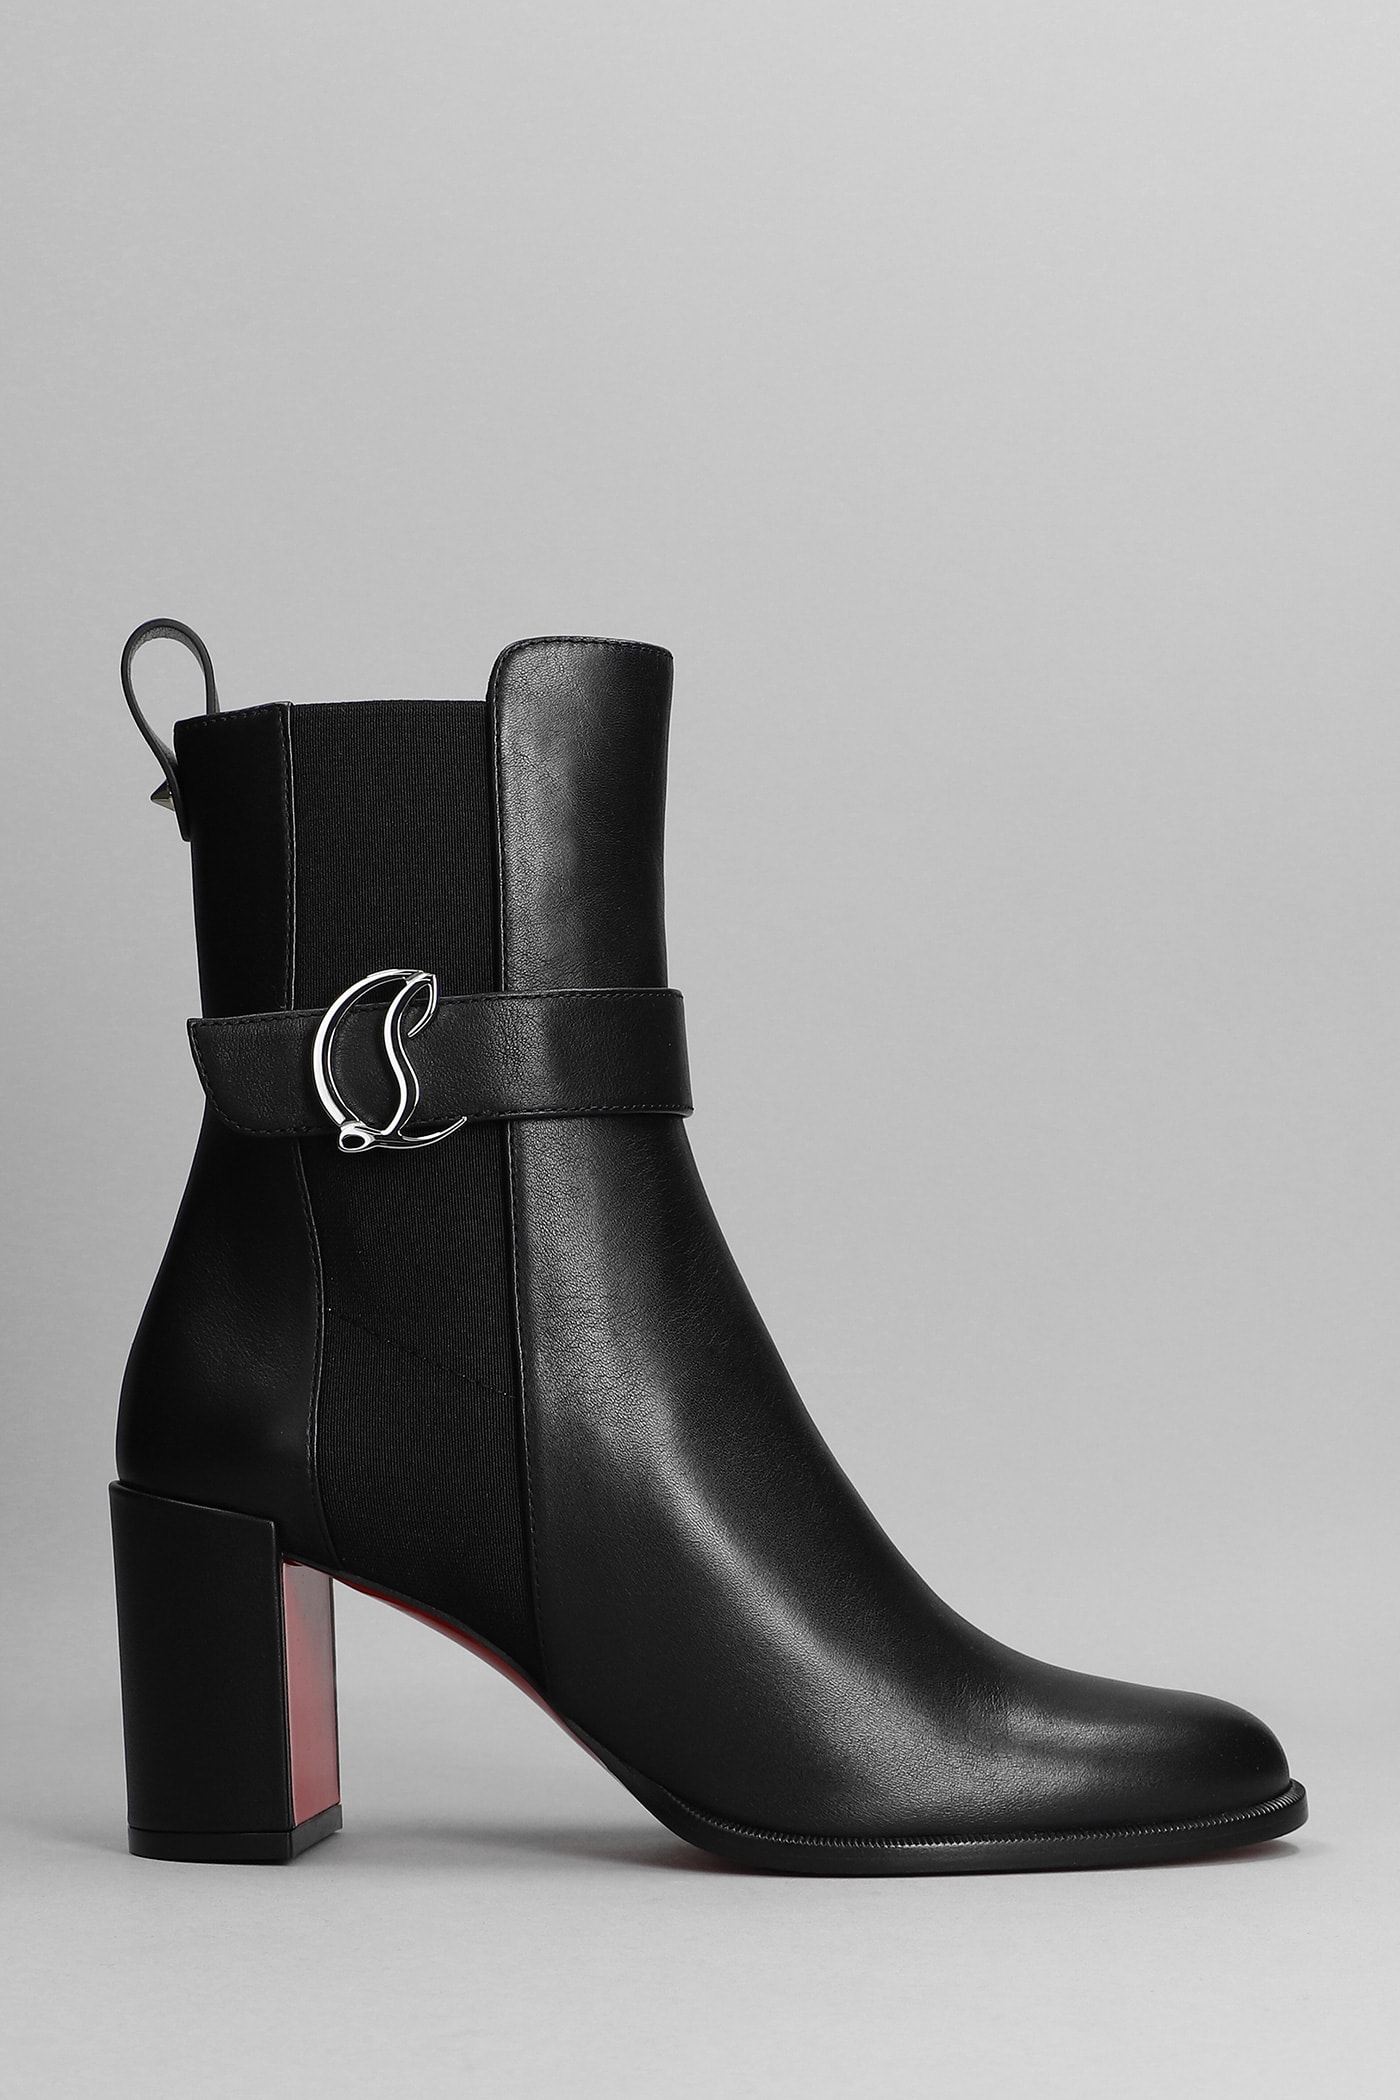 Christian Louboutin Chelsea Booty 70 High Heels Ankle Boots In Black Leather